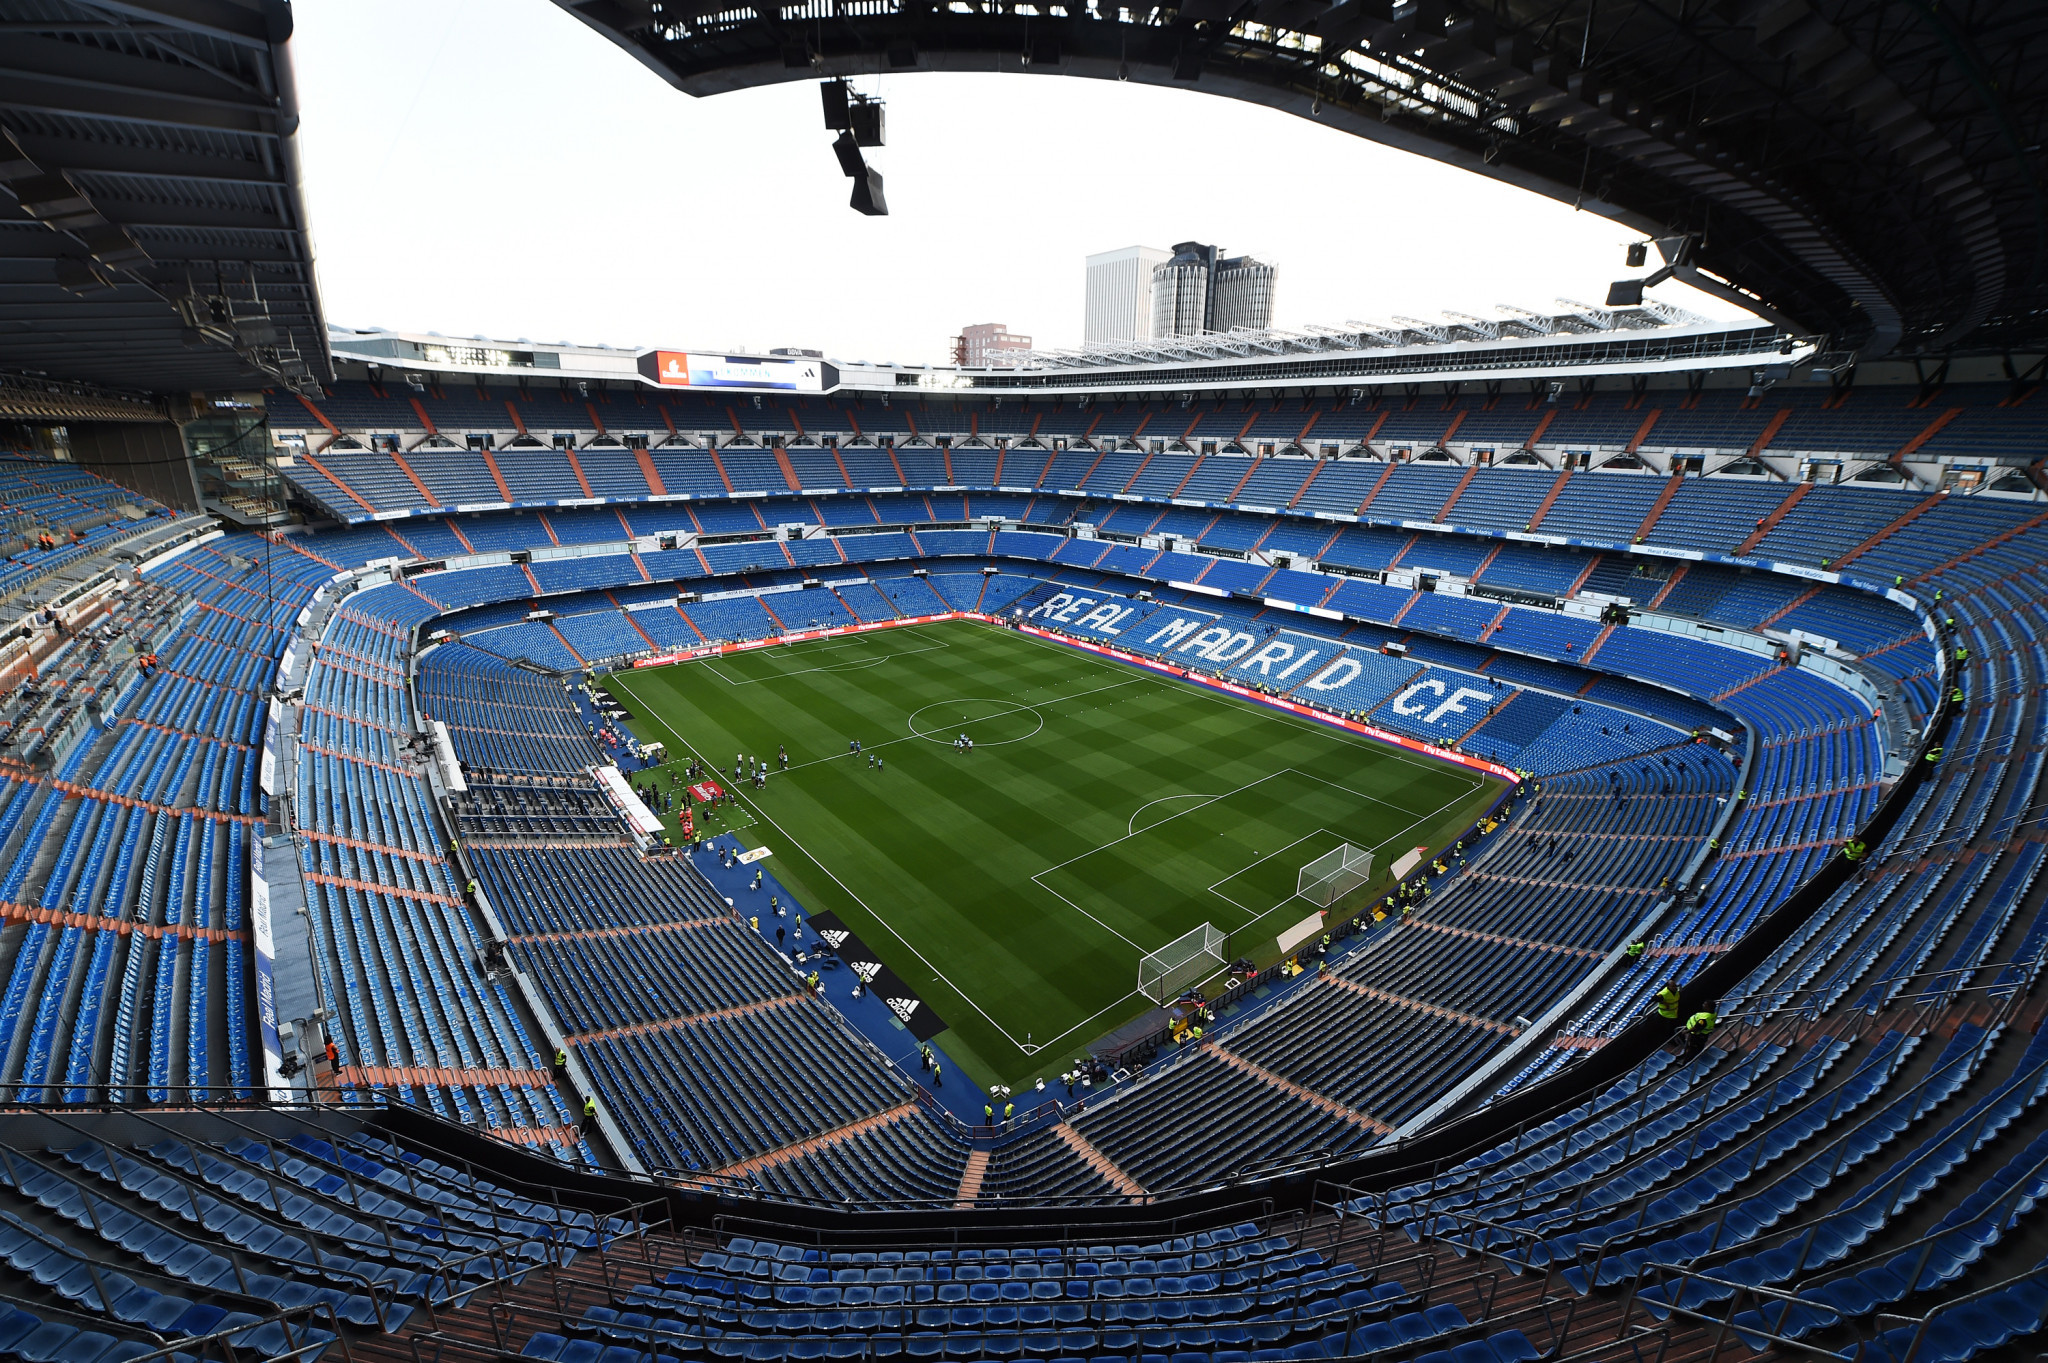 CONMEBOL confirm second leg of Copa Libertadores final to be held in Madrid after bus attack